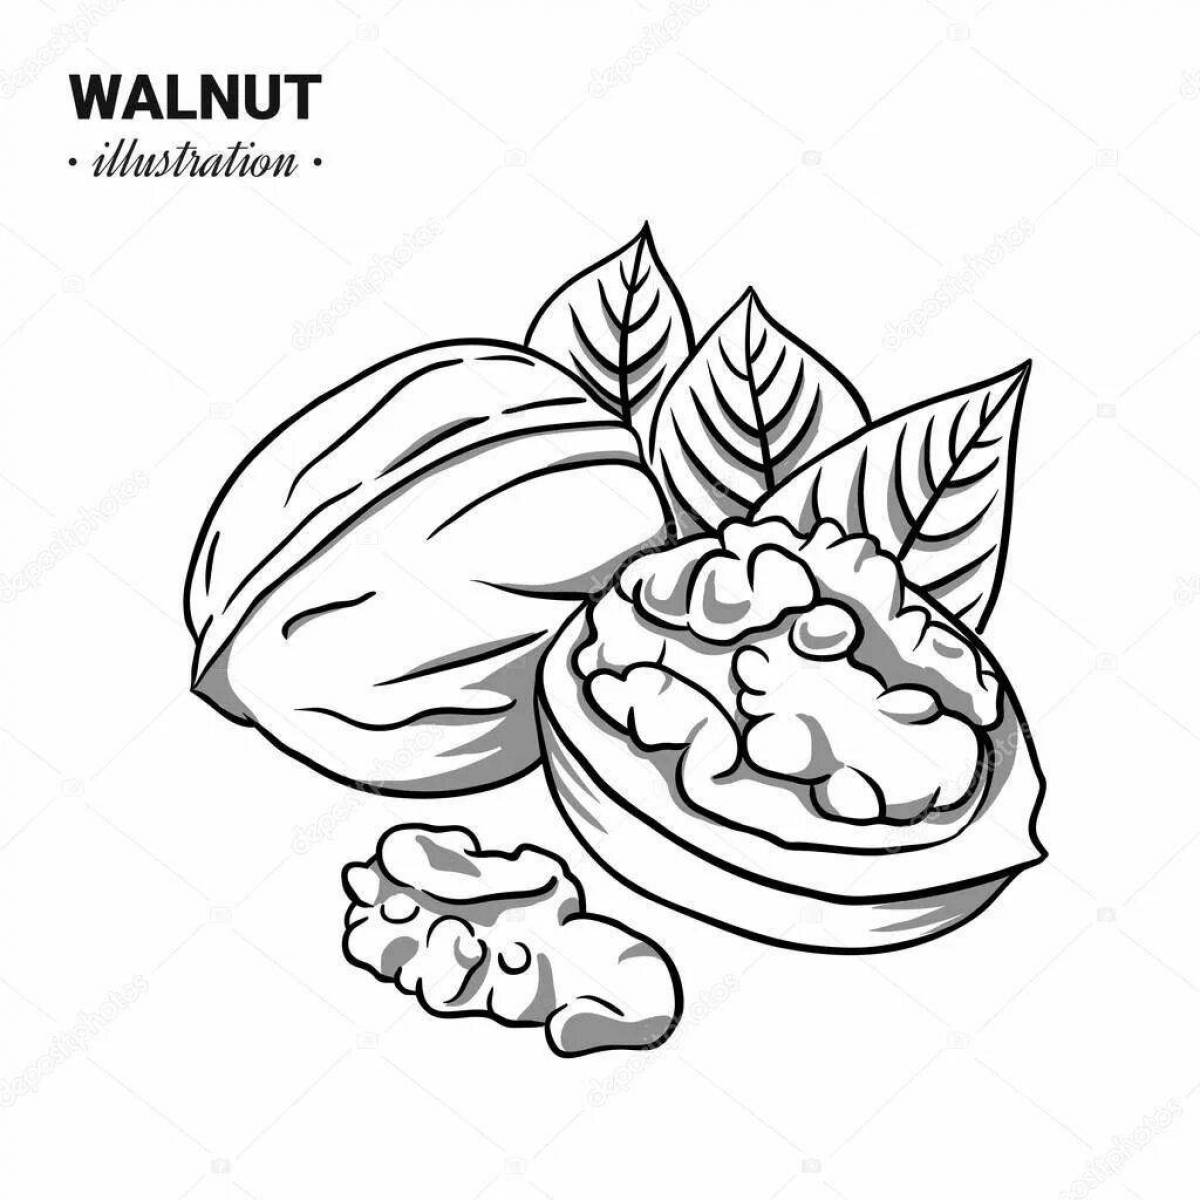 Exquisite walnut coloring book for kids